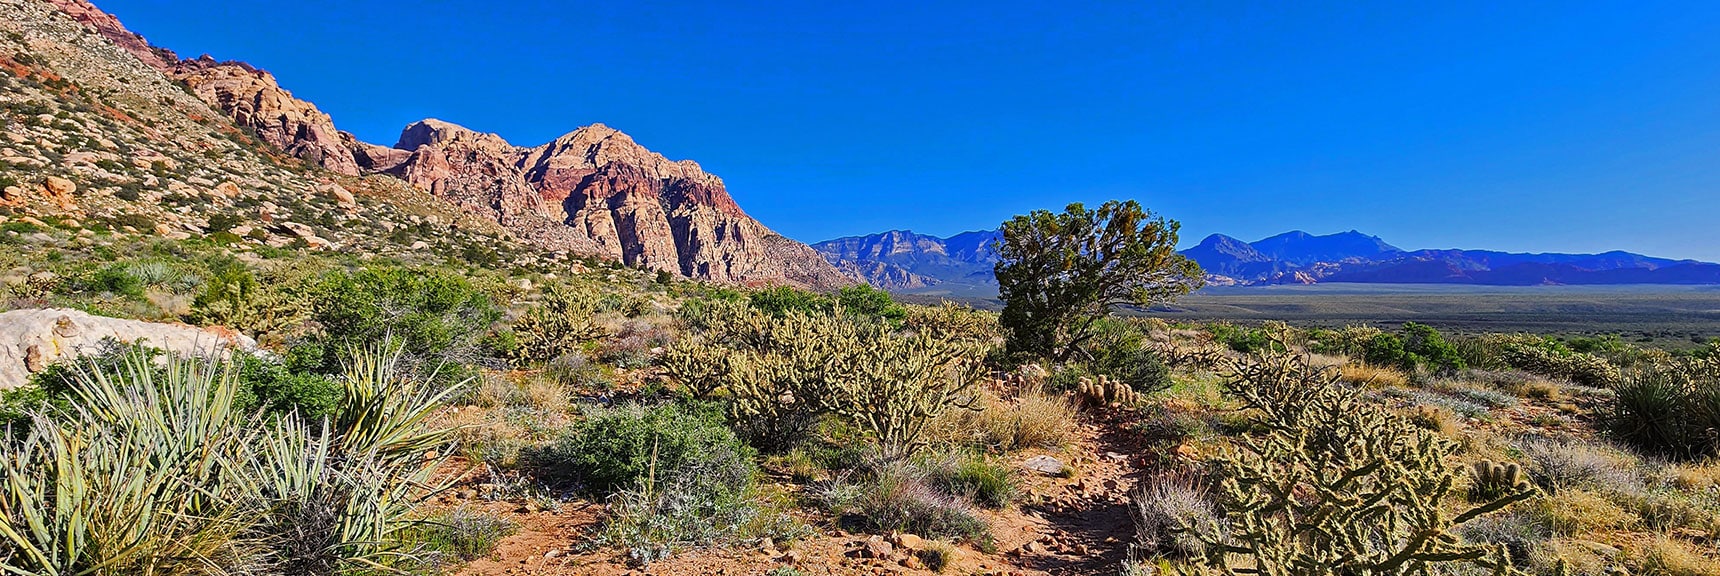 Knoll Trail on East Base of Rainbow Mt Approaching Juniper Canyon | Knoll Trail | Red Rock Canyon National Conservation Area, Nevada | David Smith | LasVegasAreaTrails.com